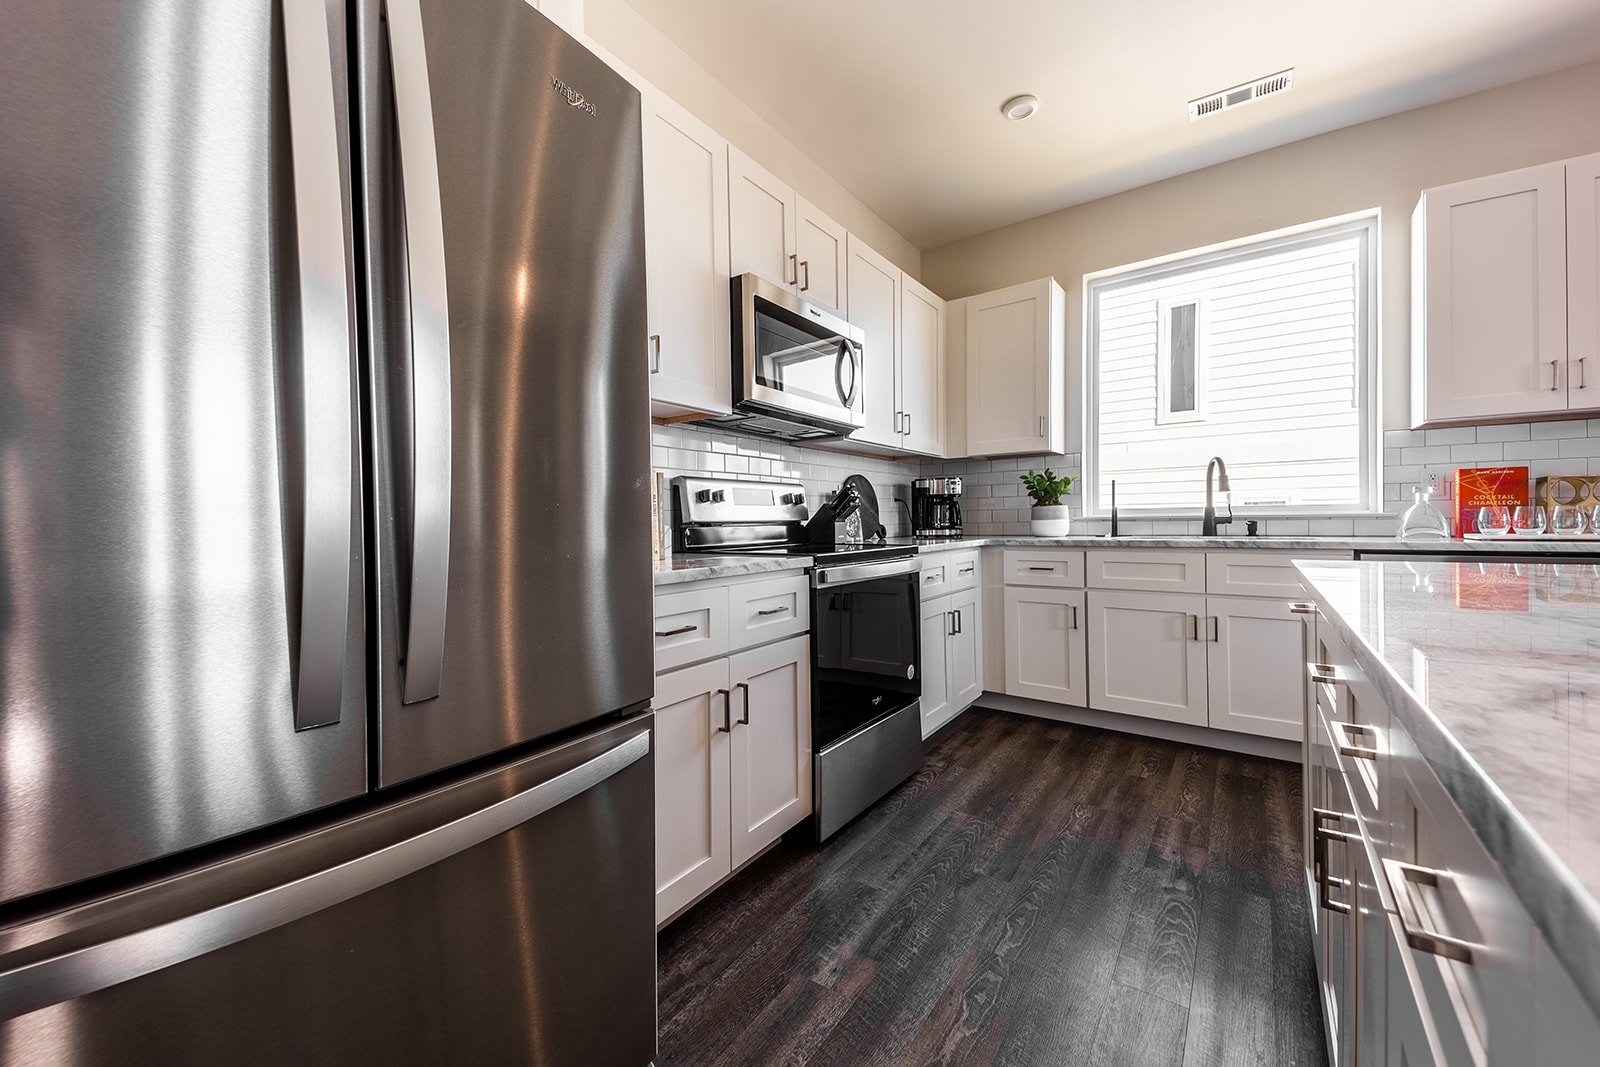 Fully equipped kitchen stocked with your basic cooking essentials. Complete with stainless steel appliances and breakfast bar seating.